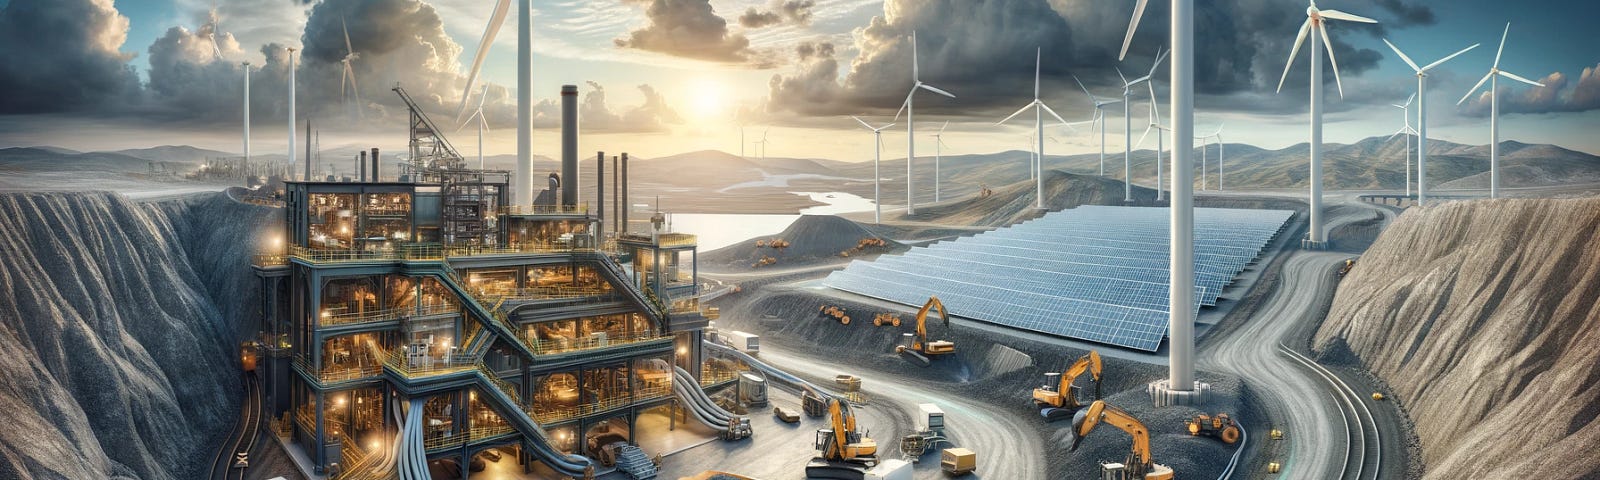 ChatGPT & DALL-E generated panoramic image depicting a modern mine with electric trucks and equipment, powered by wind turbines and solar panels